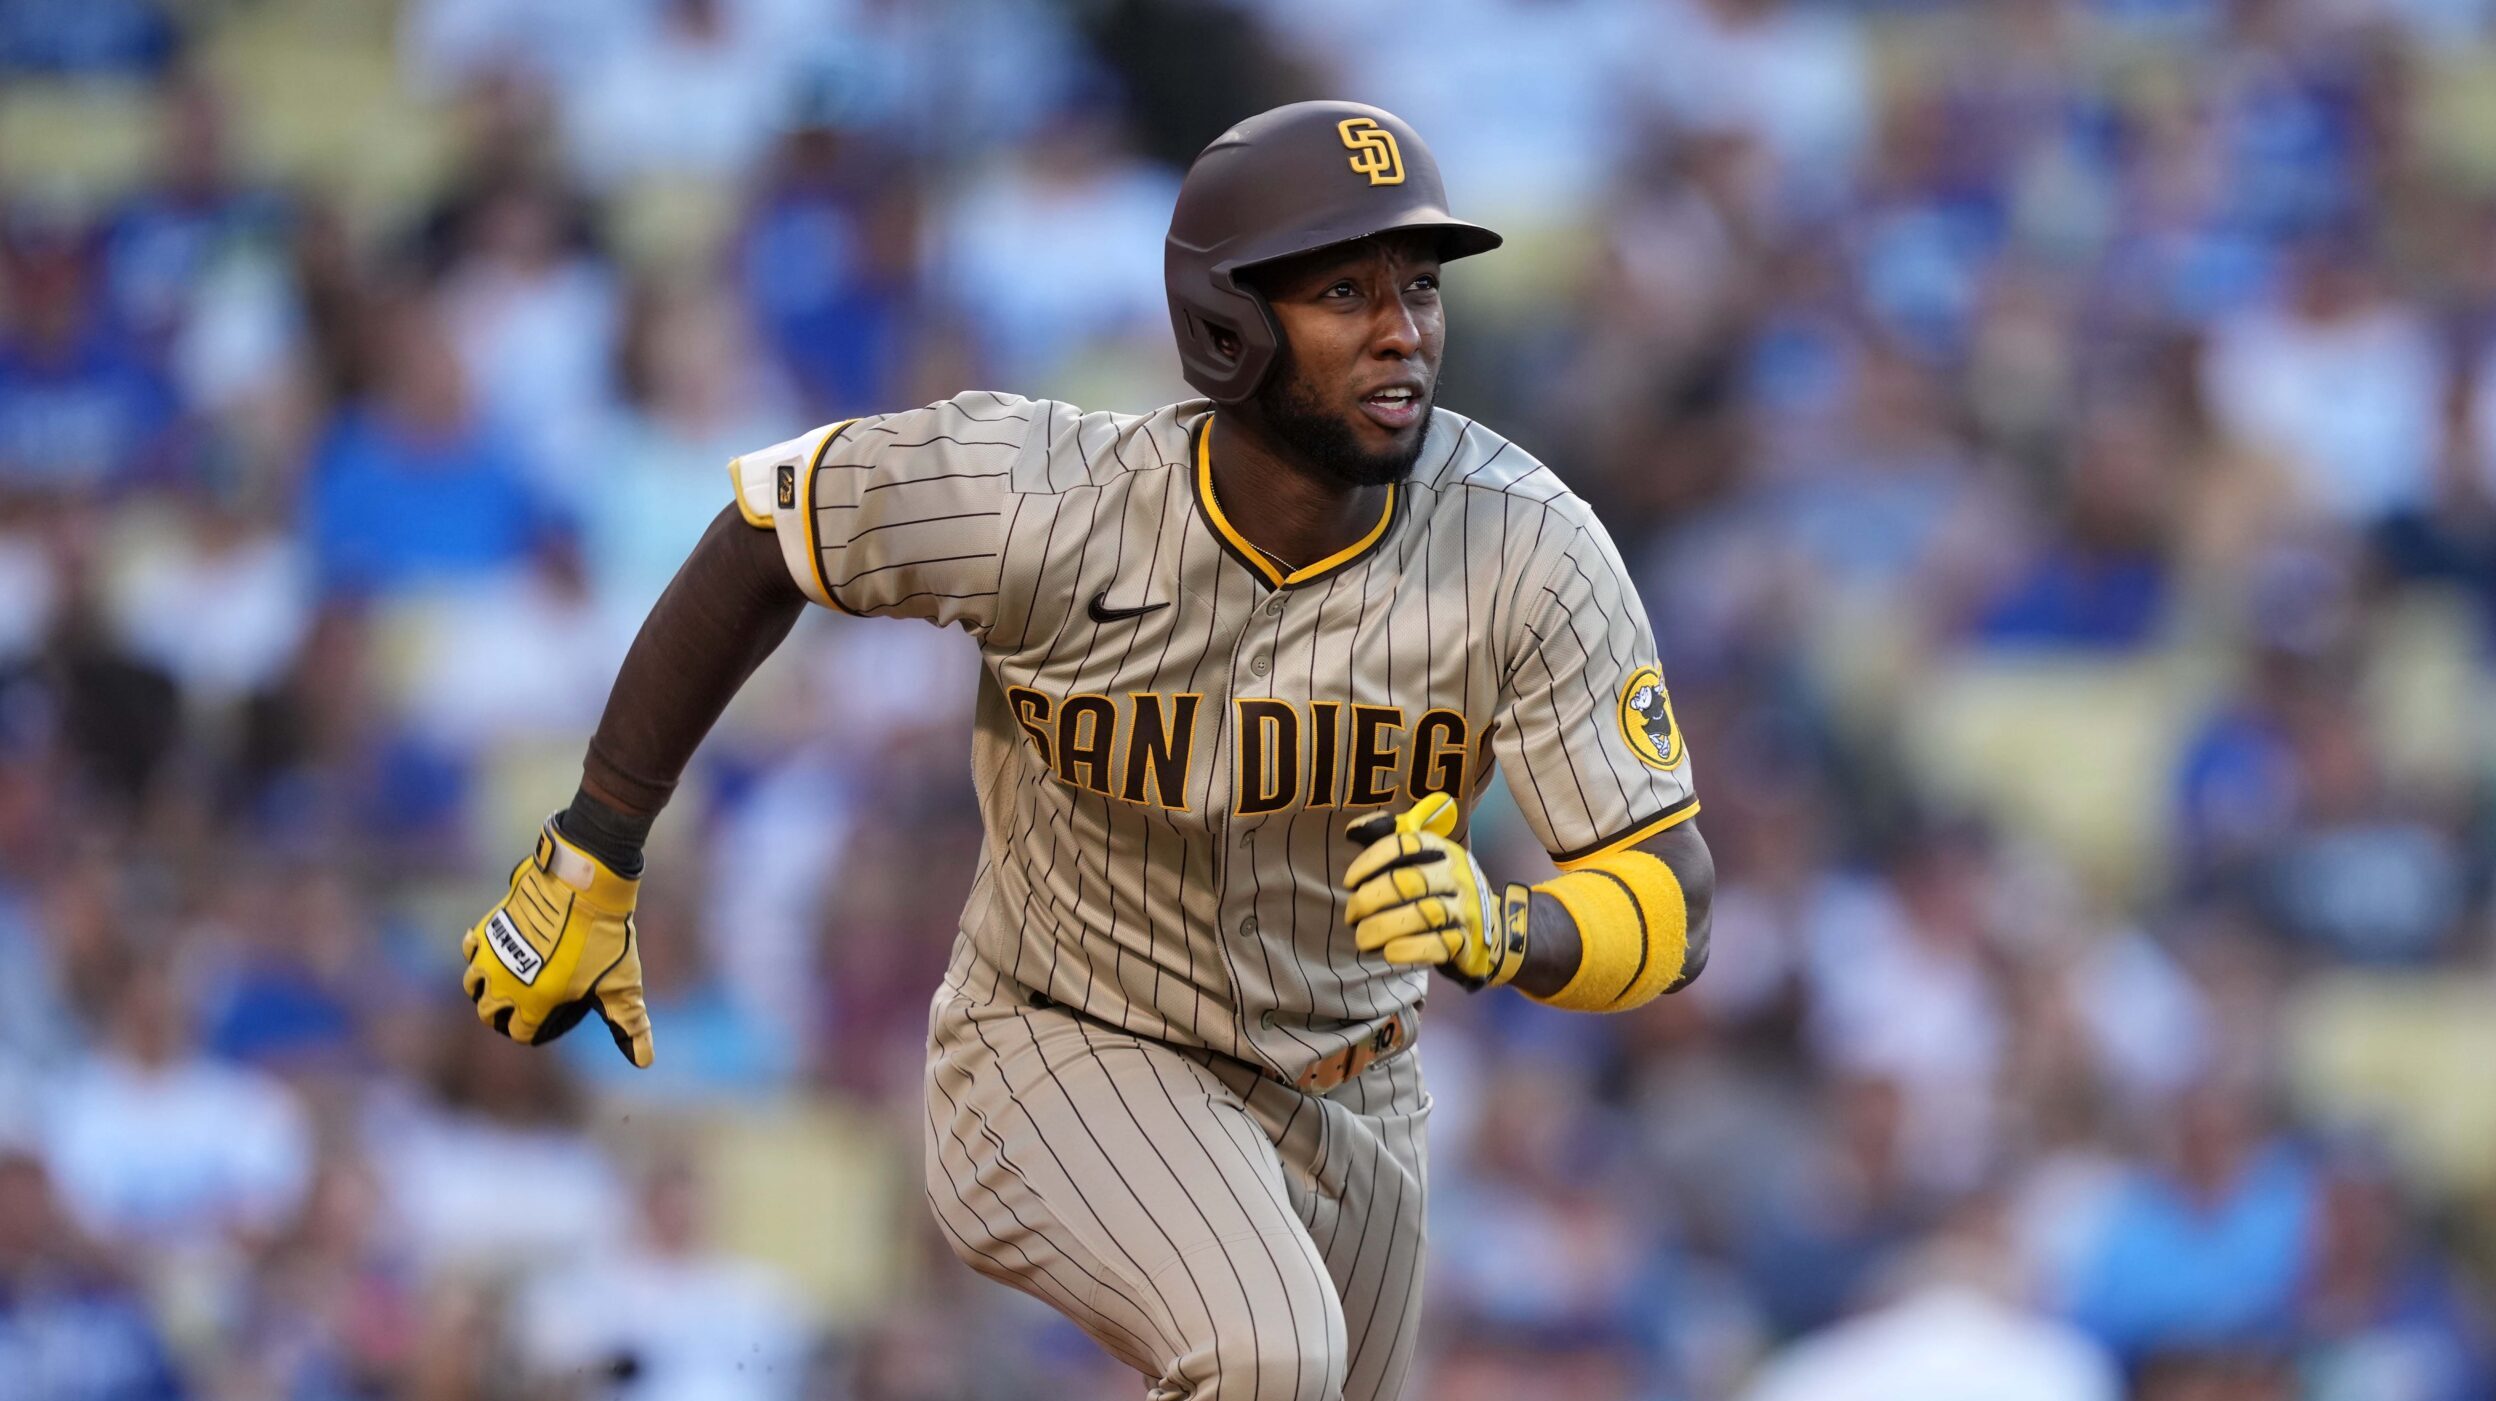 Padres Of Profar Placed on Concussion Injured List – NBC 7 San Diego